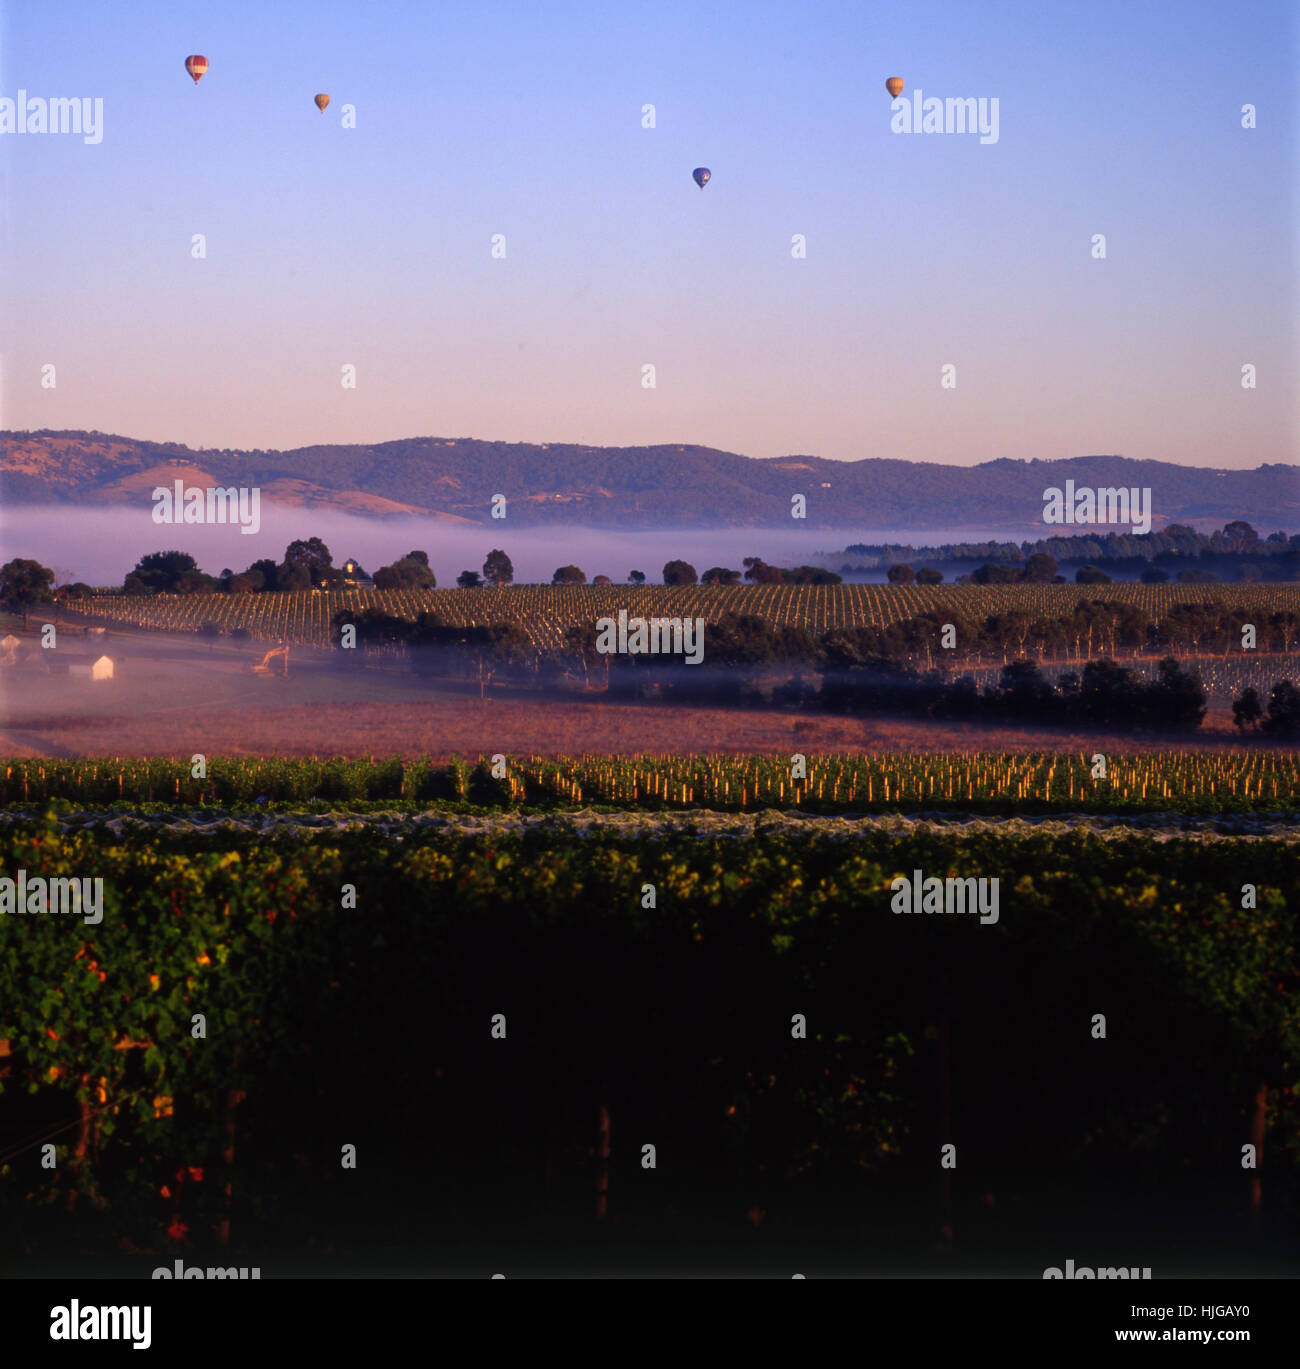 MOOD SCENE OF GRAPEVINES AND HOT-AIR BALLOONS OVER THE YARRA VALLEY, VICTORIA, AUSTRALIA Stock Photo